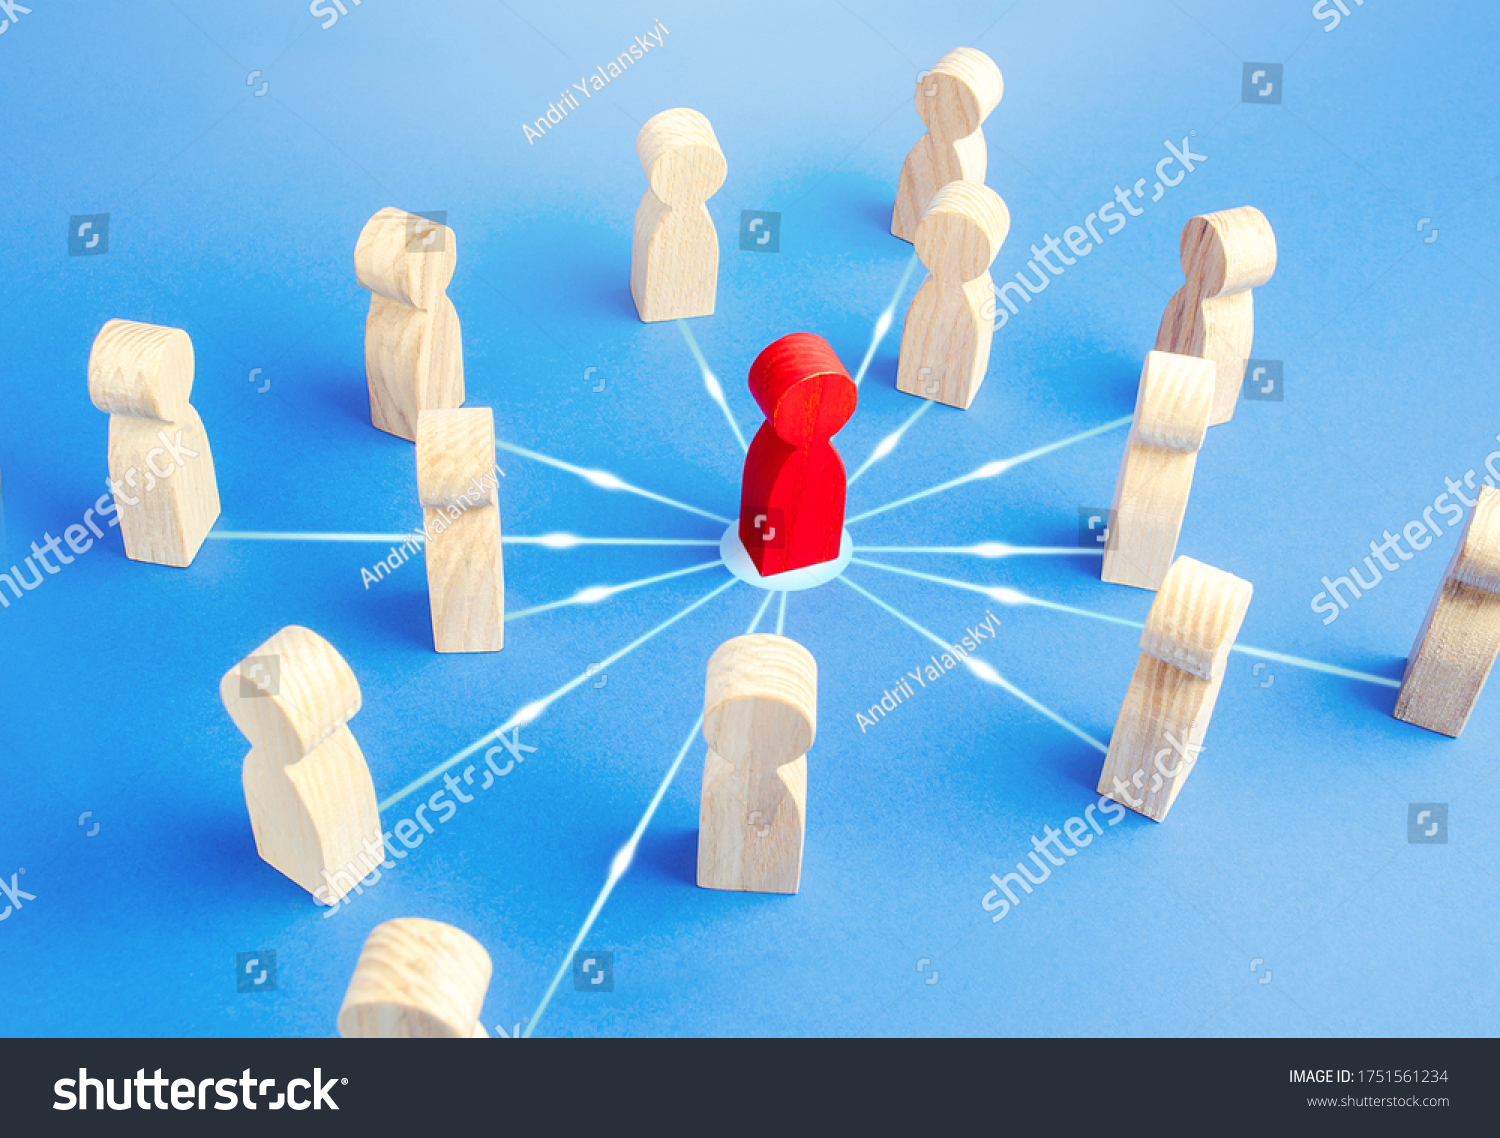 Red person attracts surrounding people. Leadership skills. Followers of leader and his ideas. Cooperation, collaboration to achieve goals. Influence, power. Bringing people together to solve a problem #1751561234